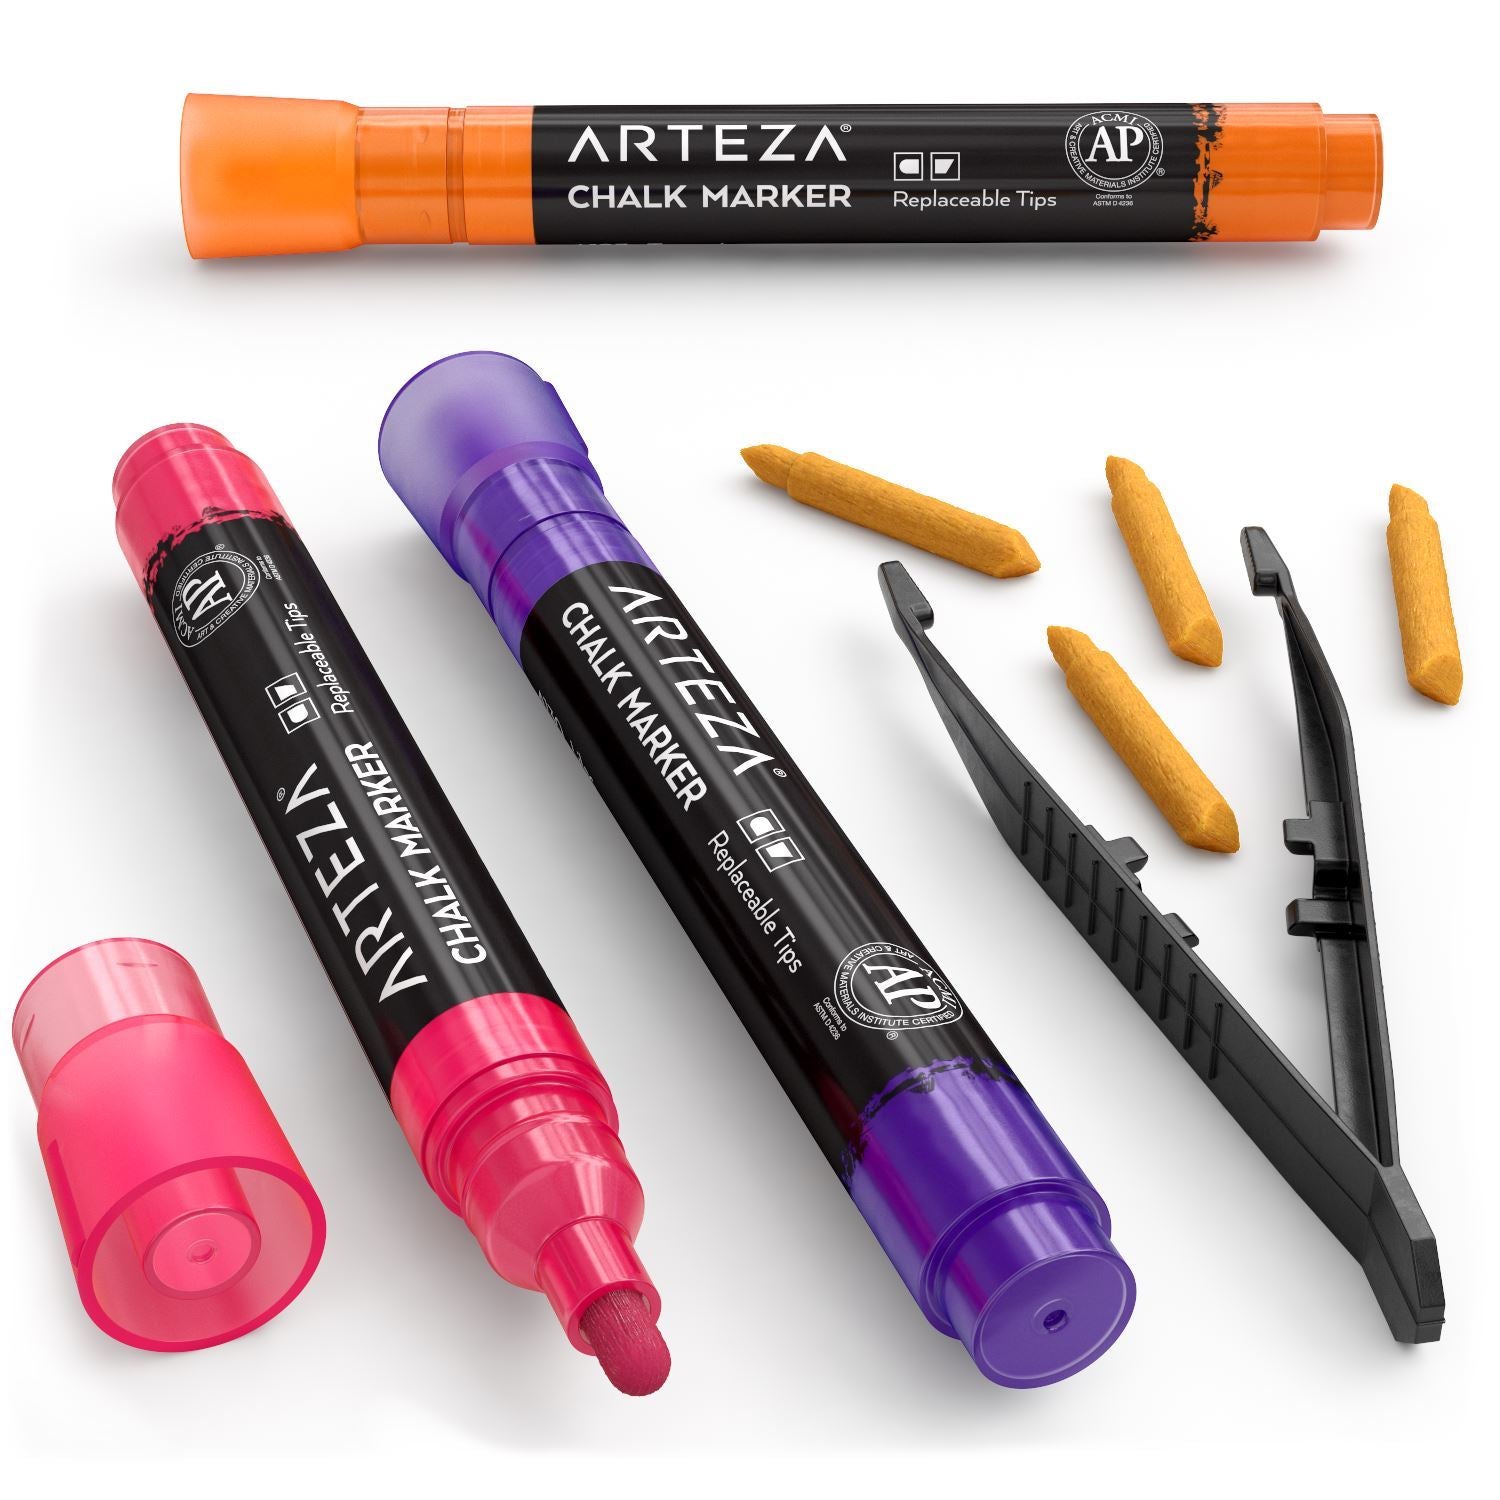 16 Vibrant Liquid Chalk Markers w/Case - Easy to Clean & Erase Chalkboard  Markers, Revesible Tip